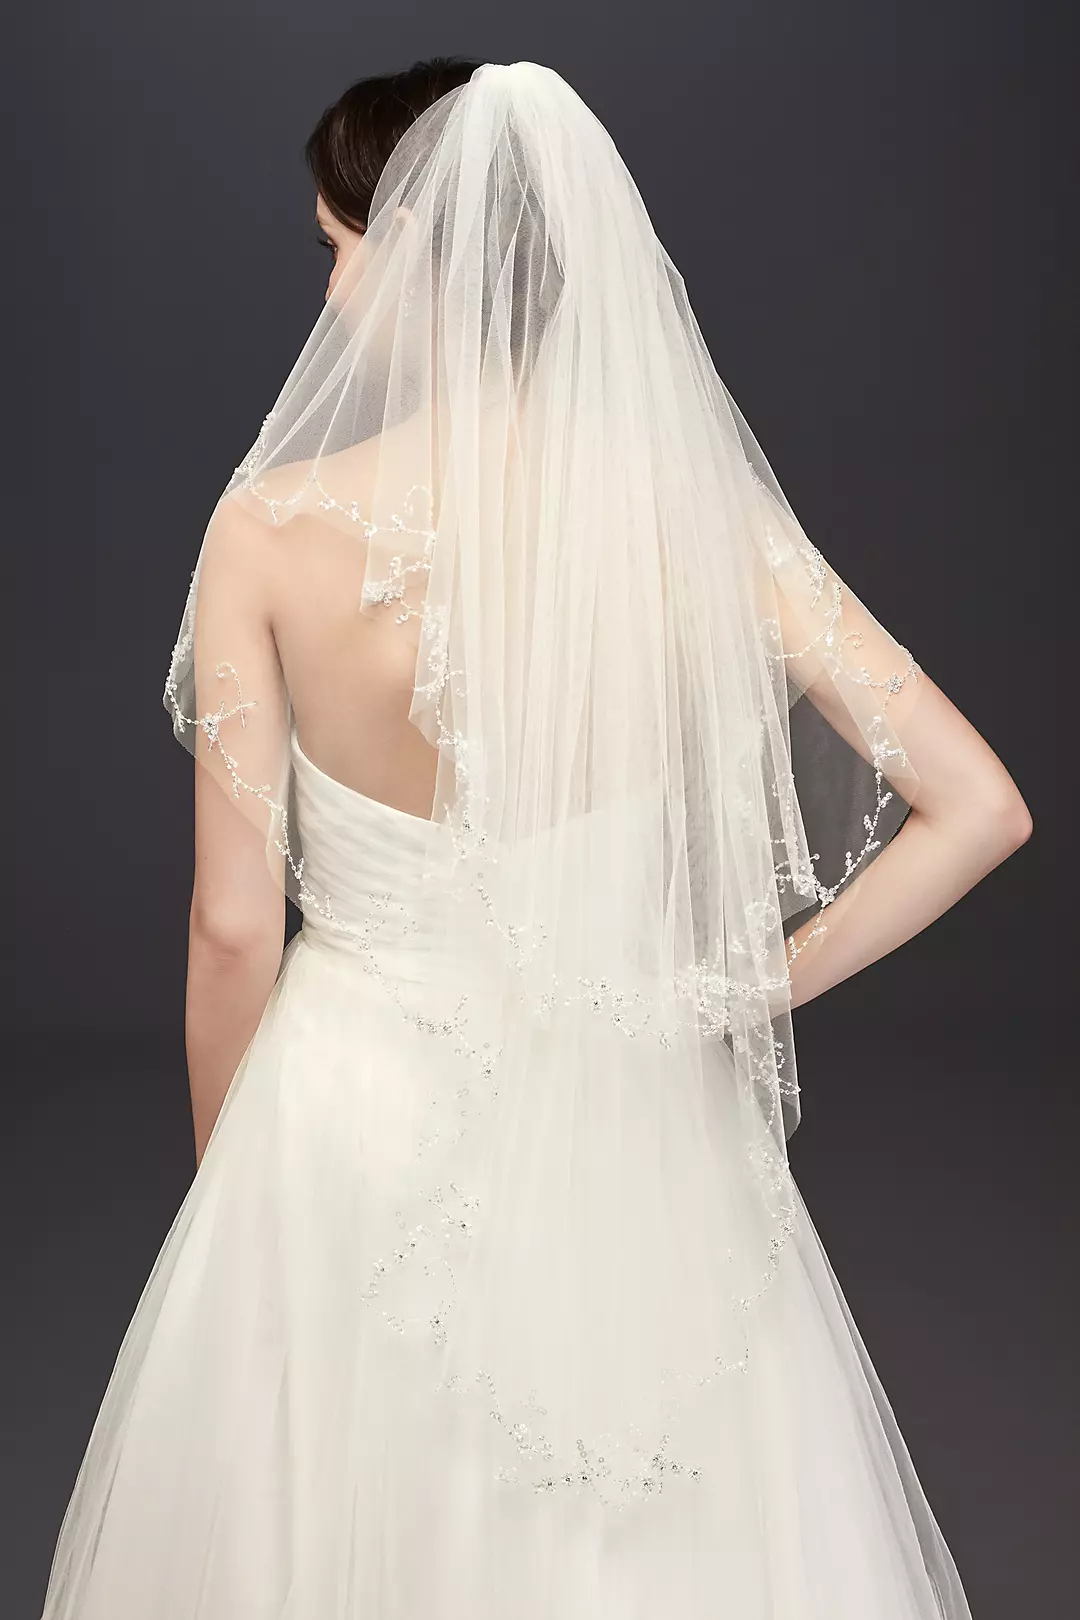 Two Tier Mid Length Veil with Beaded Edge Image 2